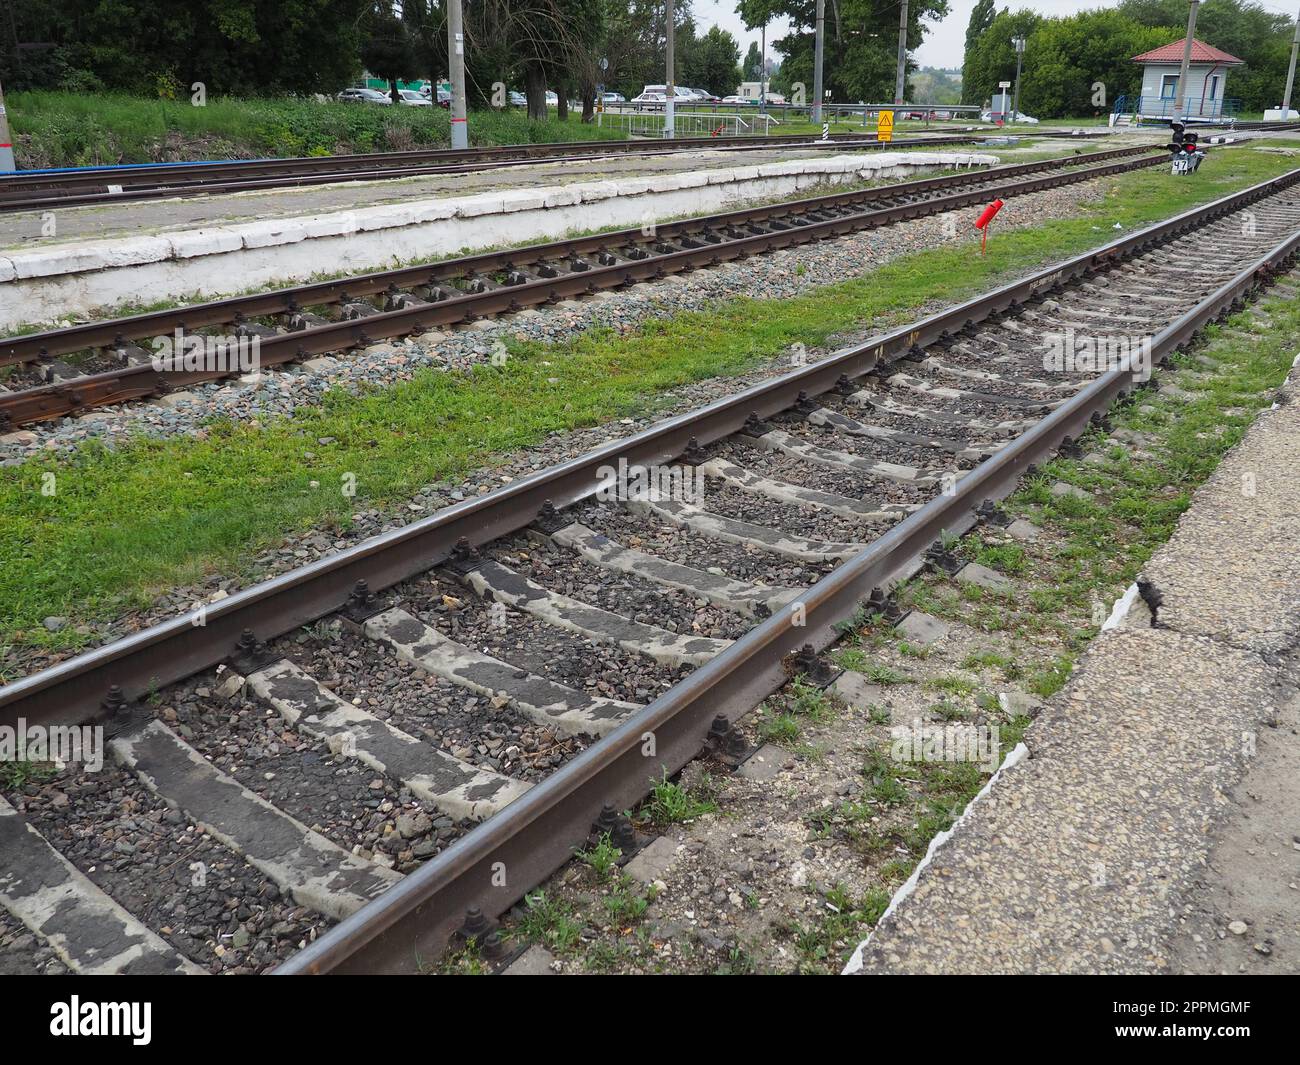 Usman, Lipetsk region, Russia August 7, 2021. Railway crossing. Rails, sleepers, traffic control point. The cars are waiting for the the movement. Traffic light red. Railway equipment and signs Stock Photo